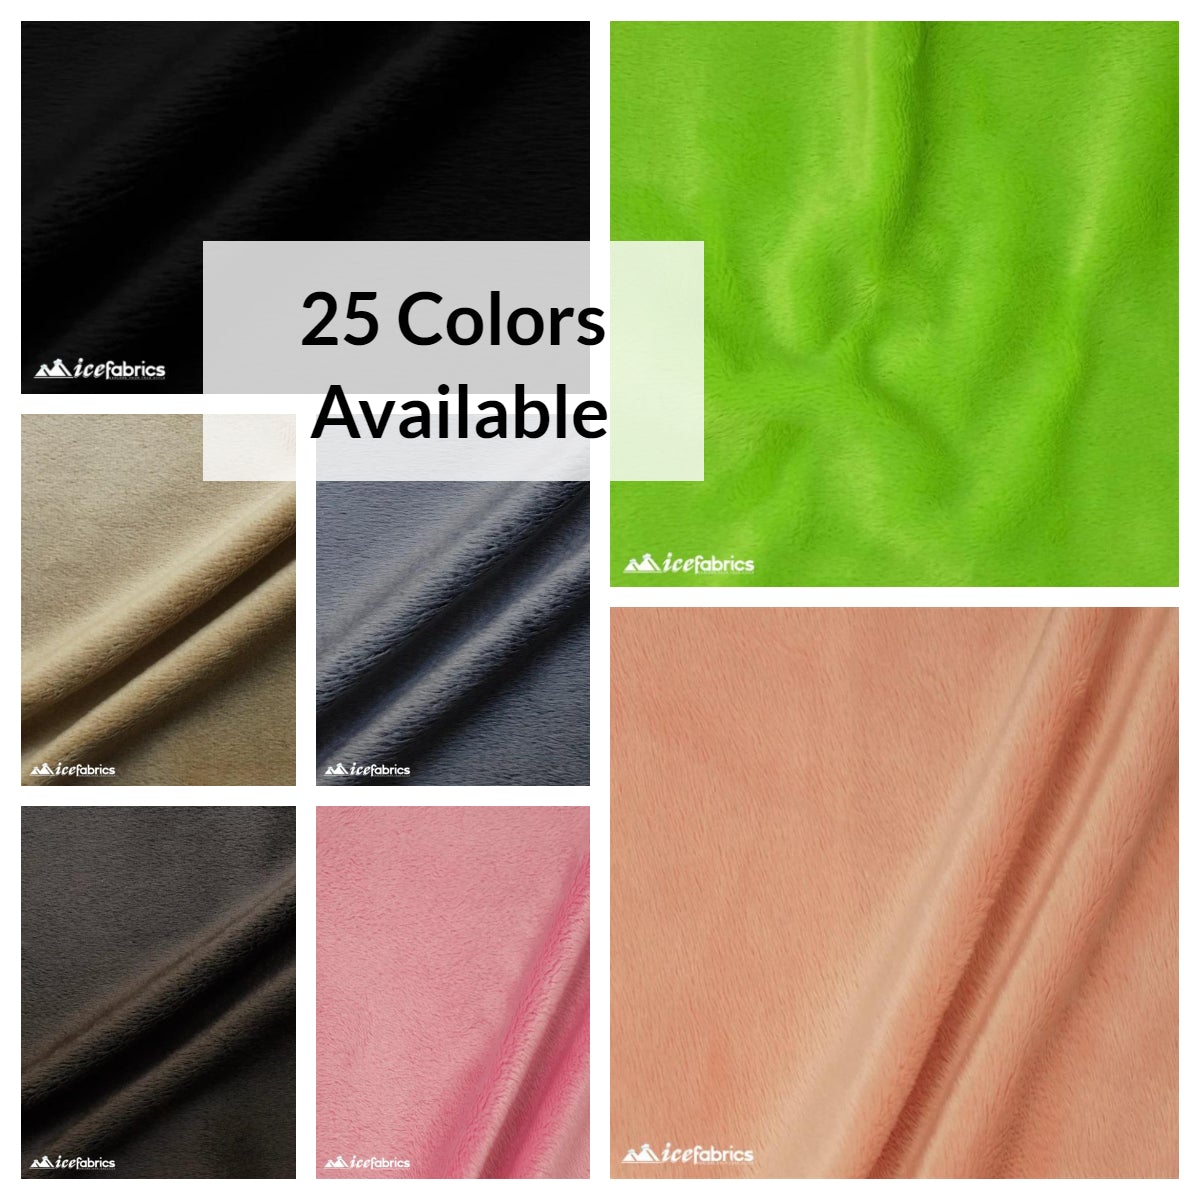 All The Wholesale super fine cotton fabric You Will Ever Need